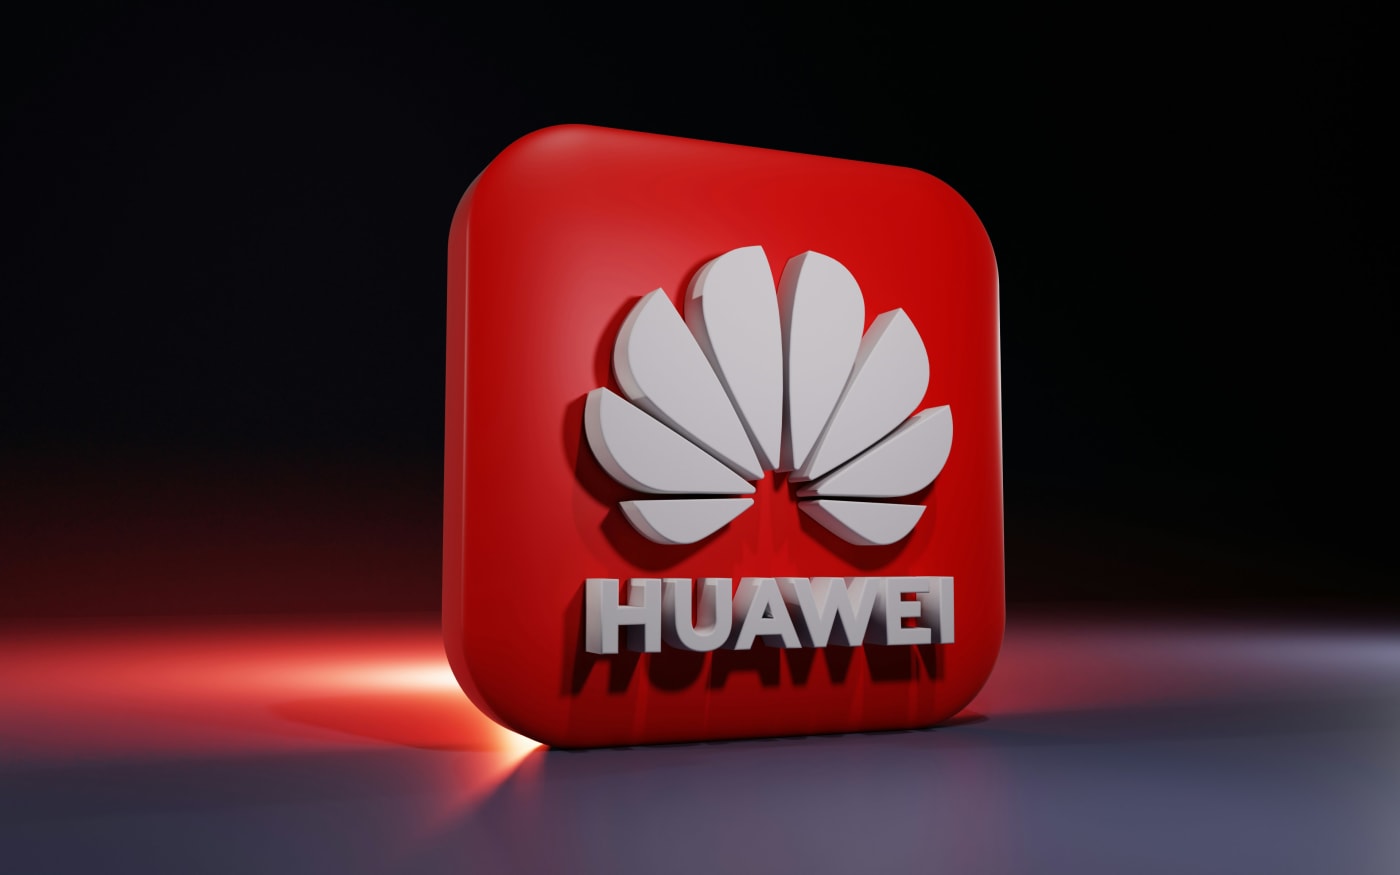 Huawei secretly funds US research after being blacklisted